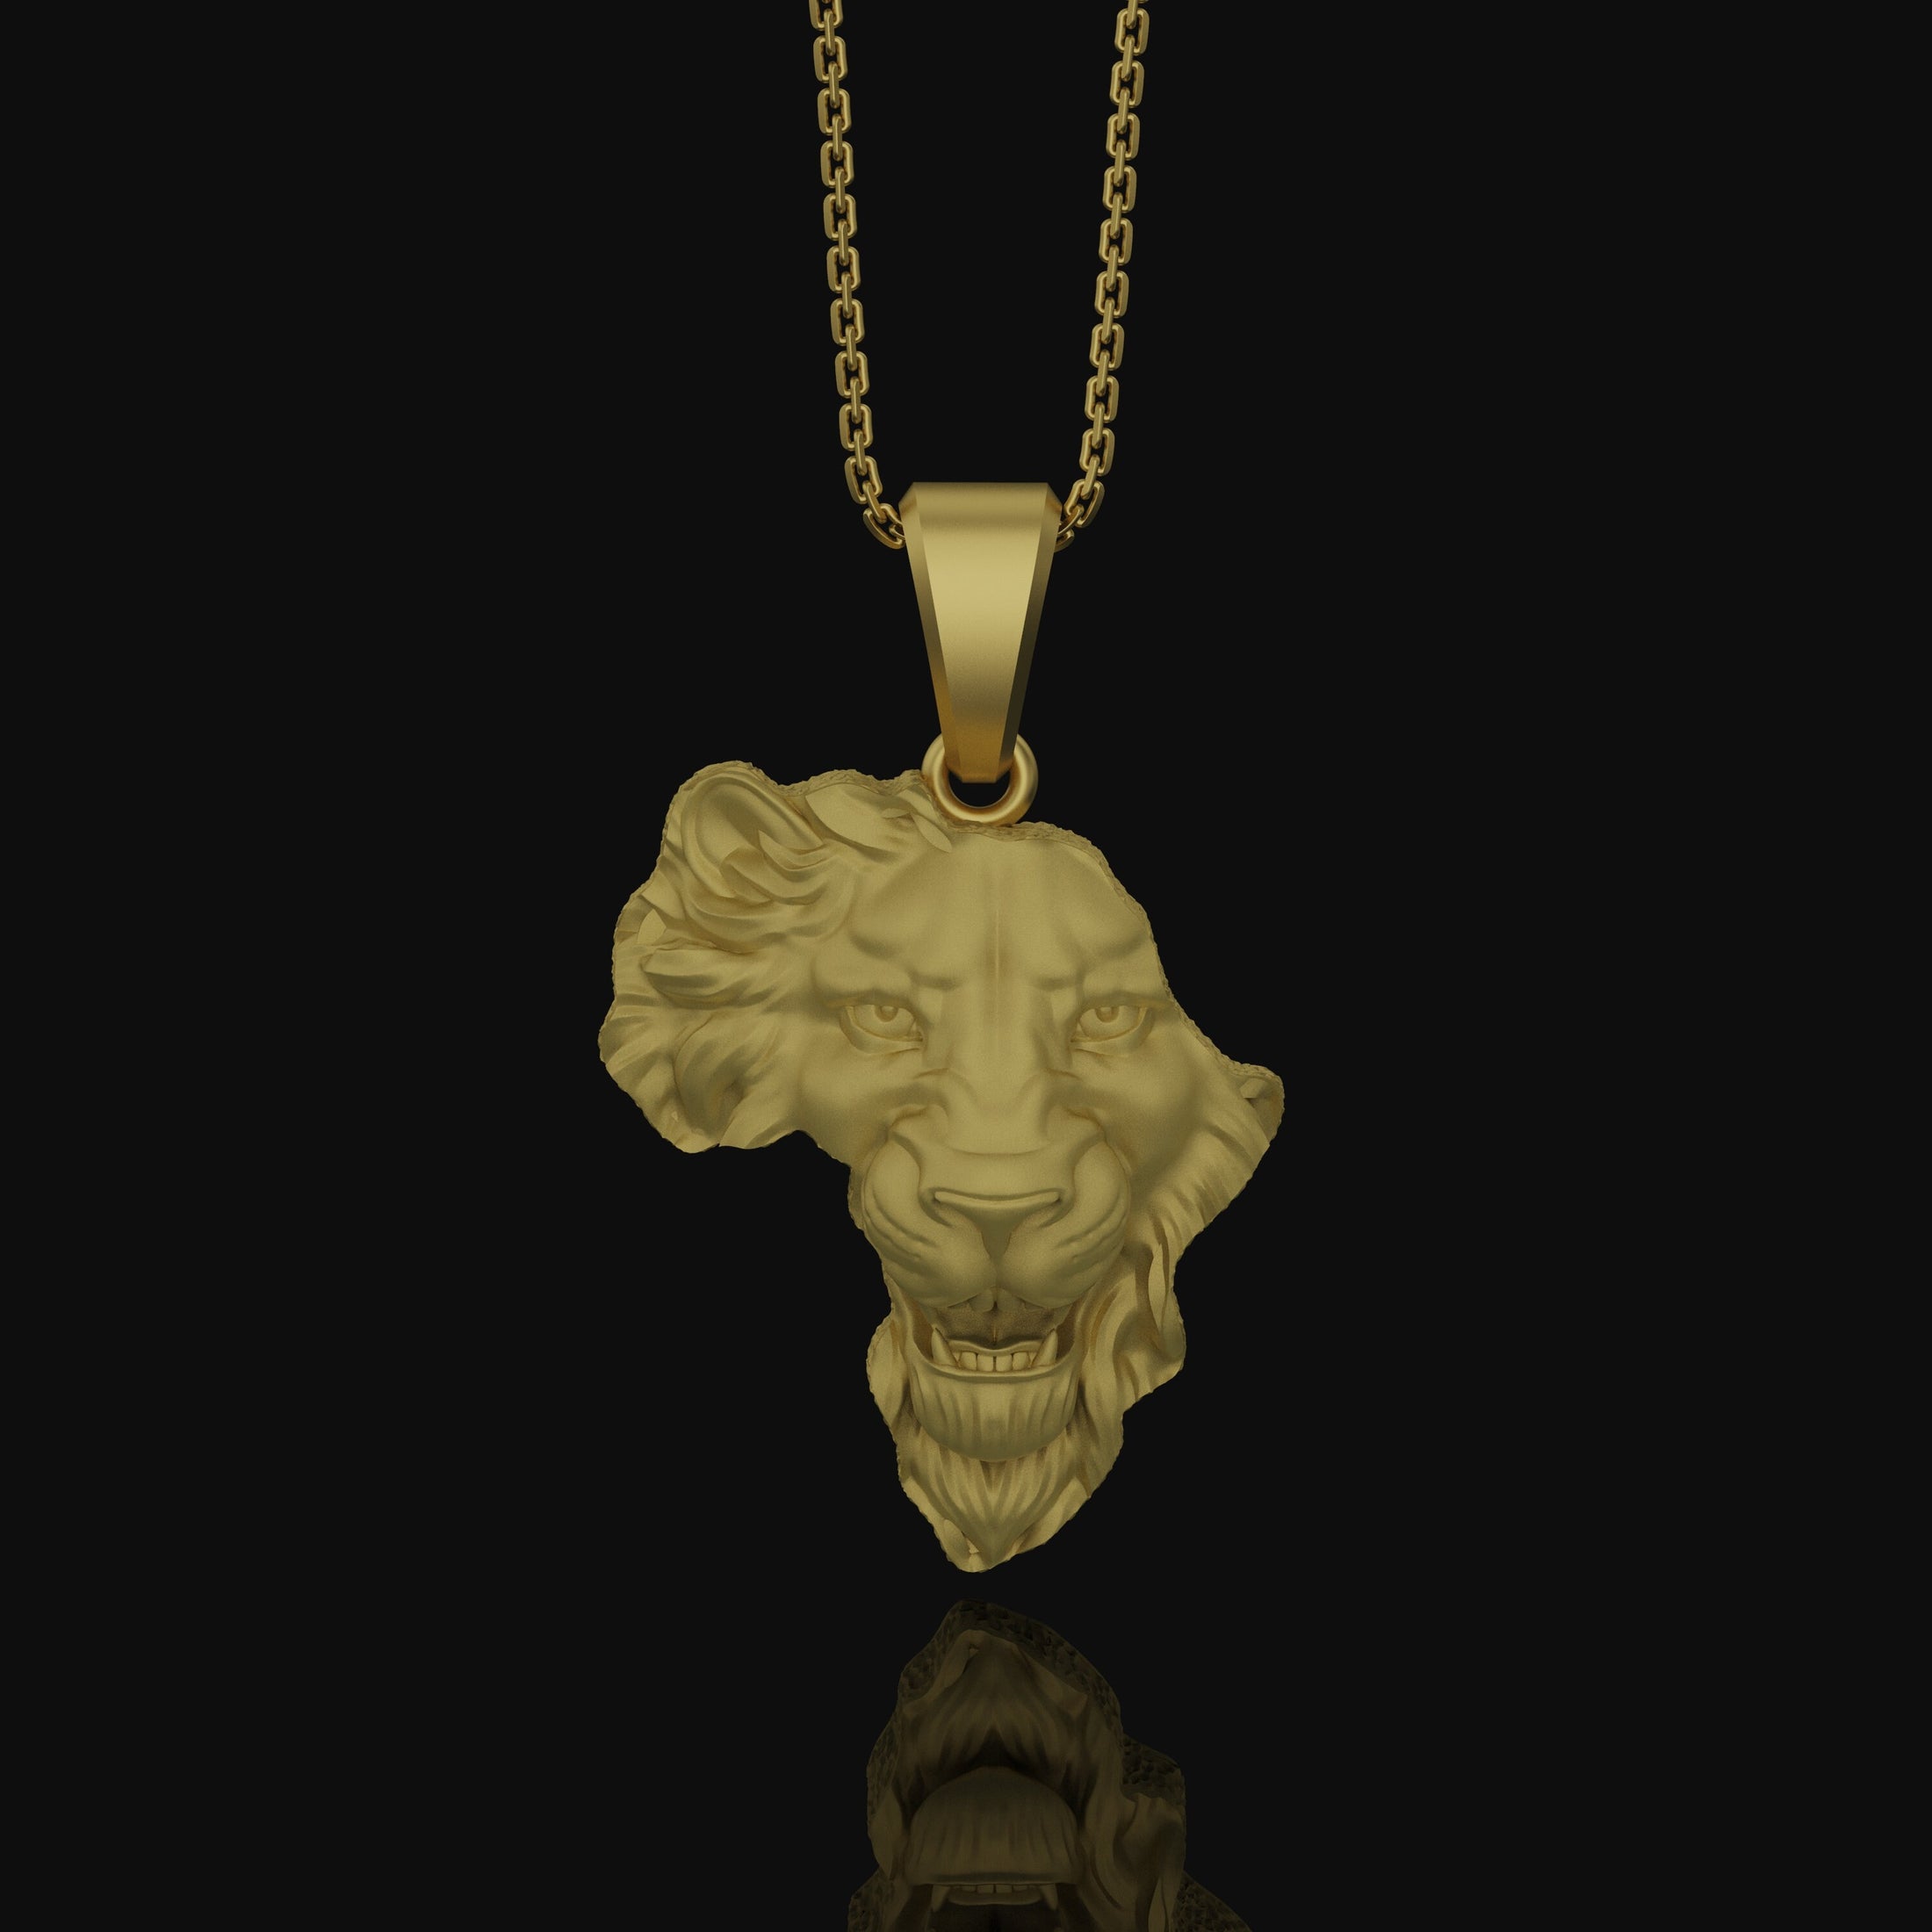 Silver Africa Continent Shaped Lion Head Necklace - Majestic Safari Style Pendant, Elegant Wildlife African Pride Jewelry Gold Matte